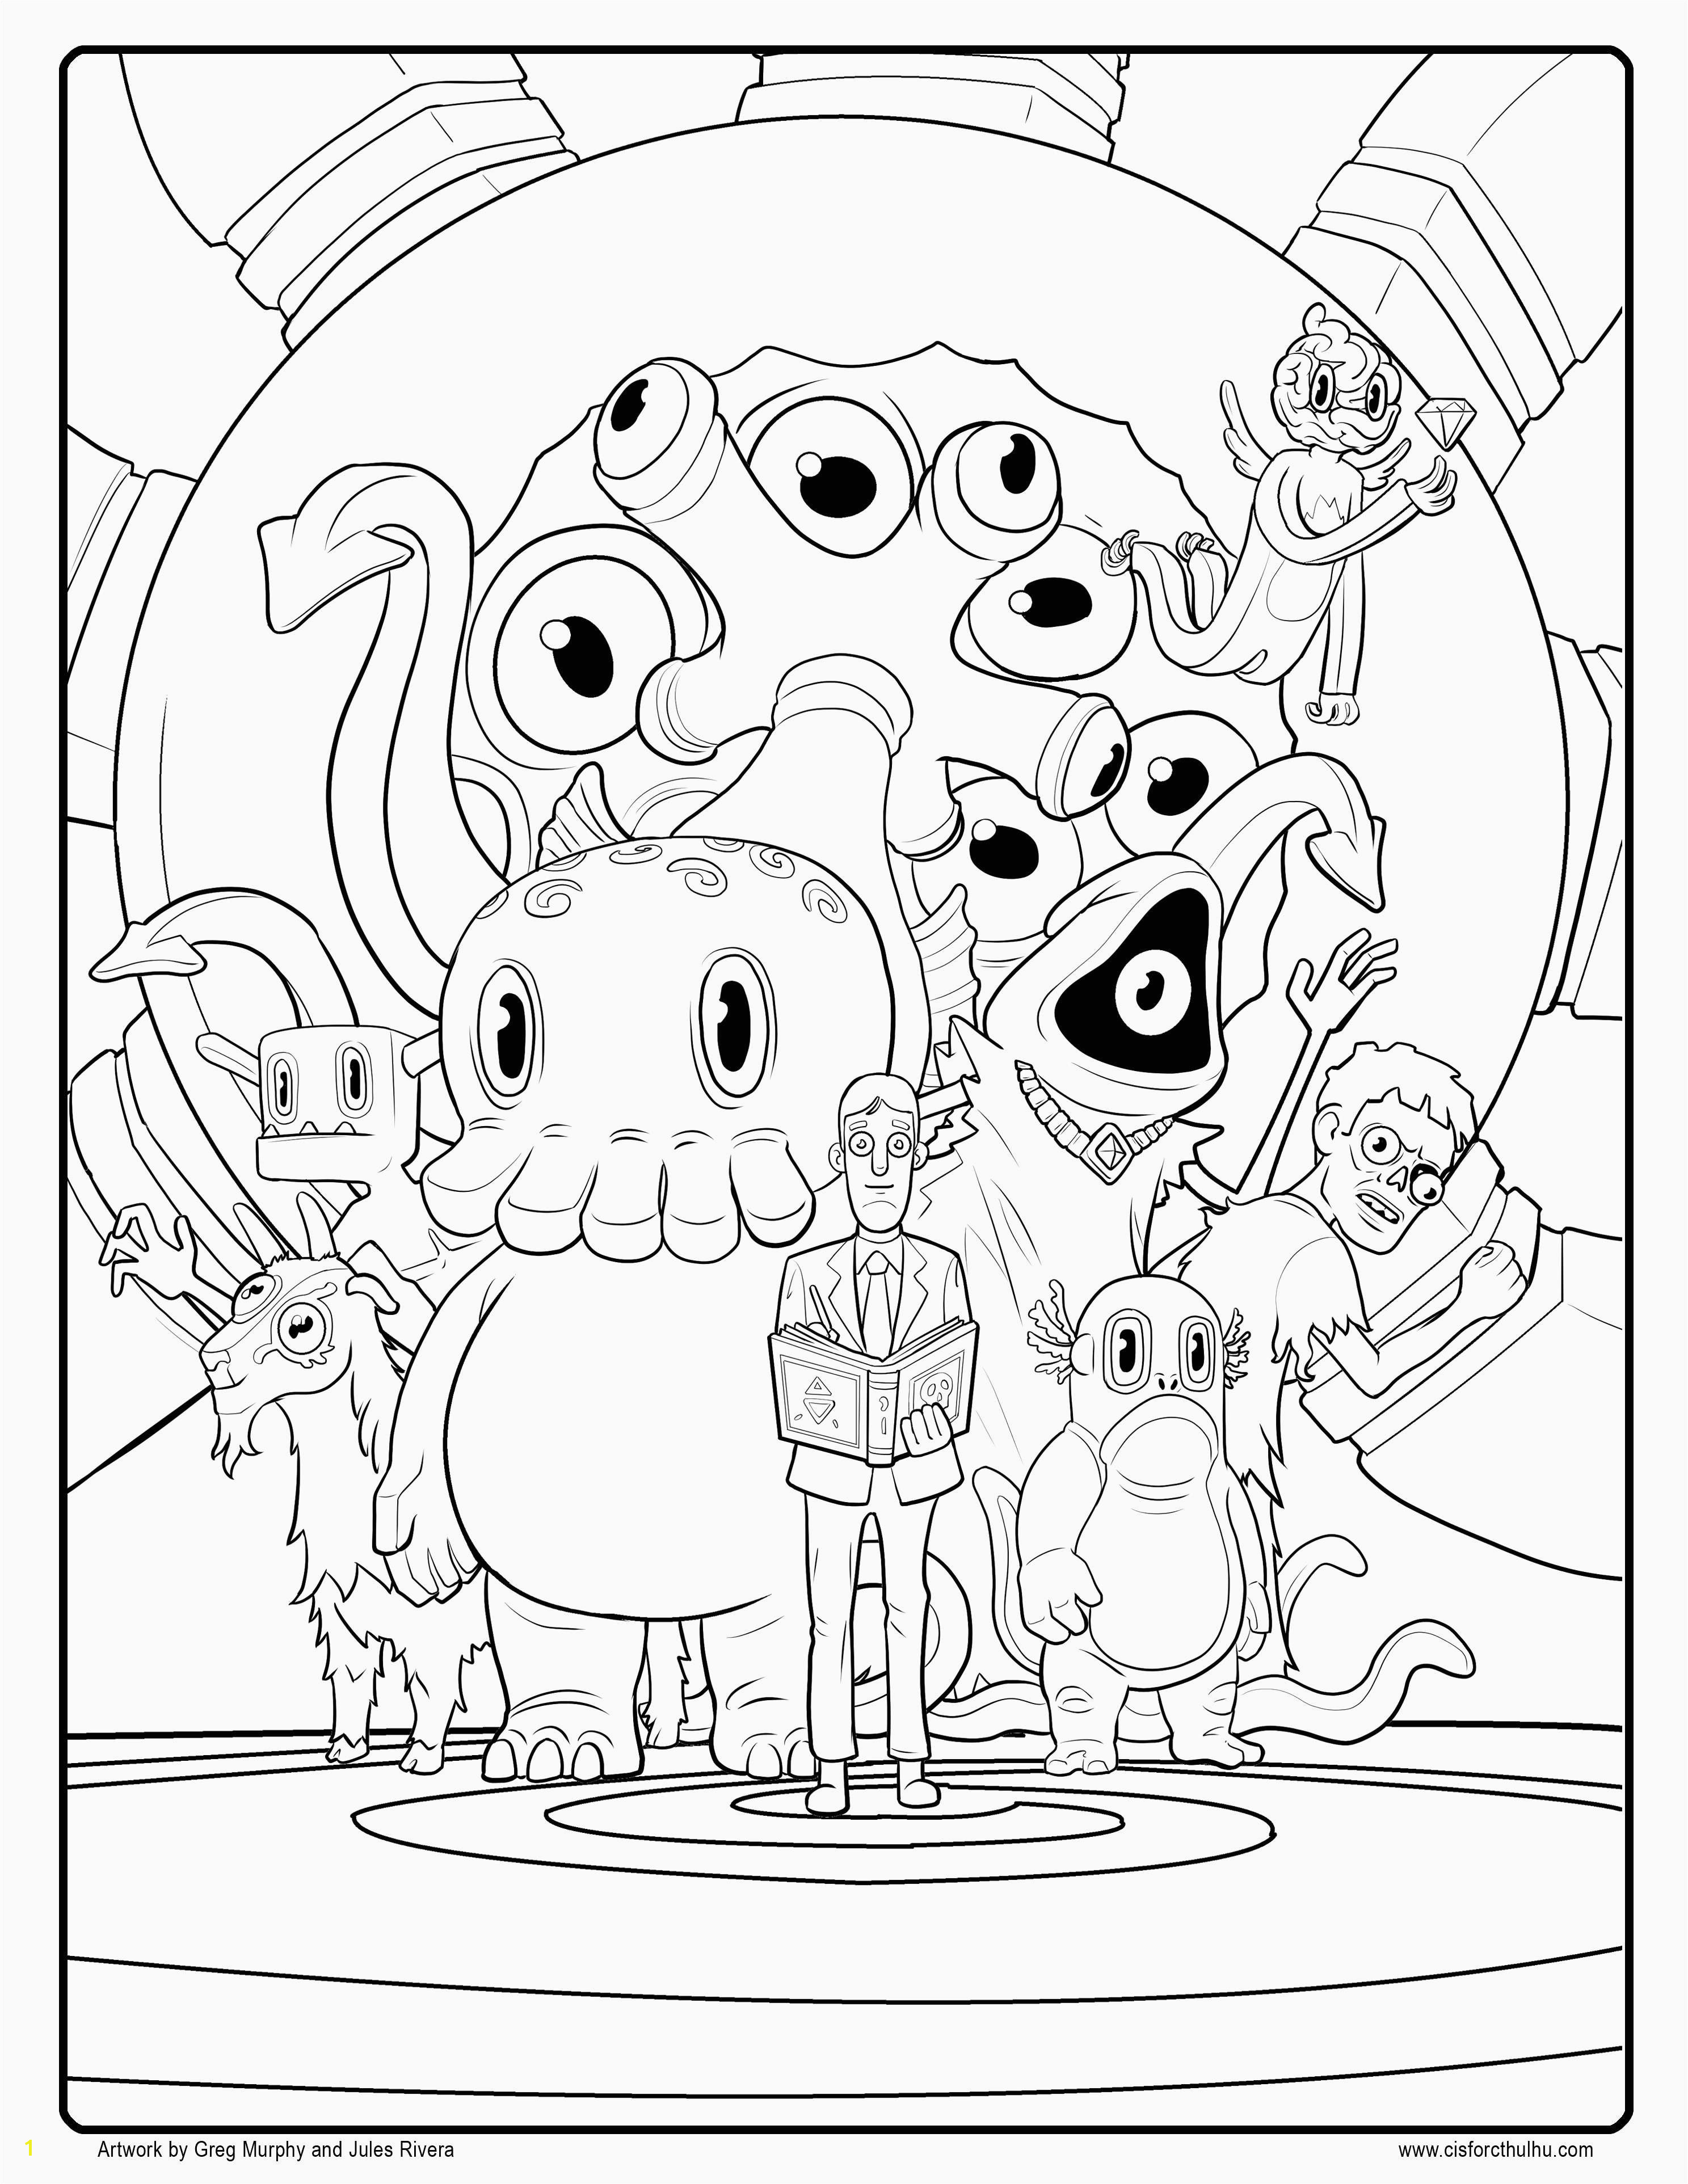 Olaf Coloring Pages Fresh Witch Coloring Page Fresh Witch Coloring Pages New Crayola Pages 0d